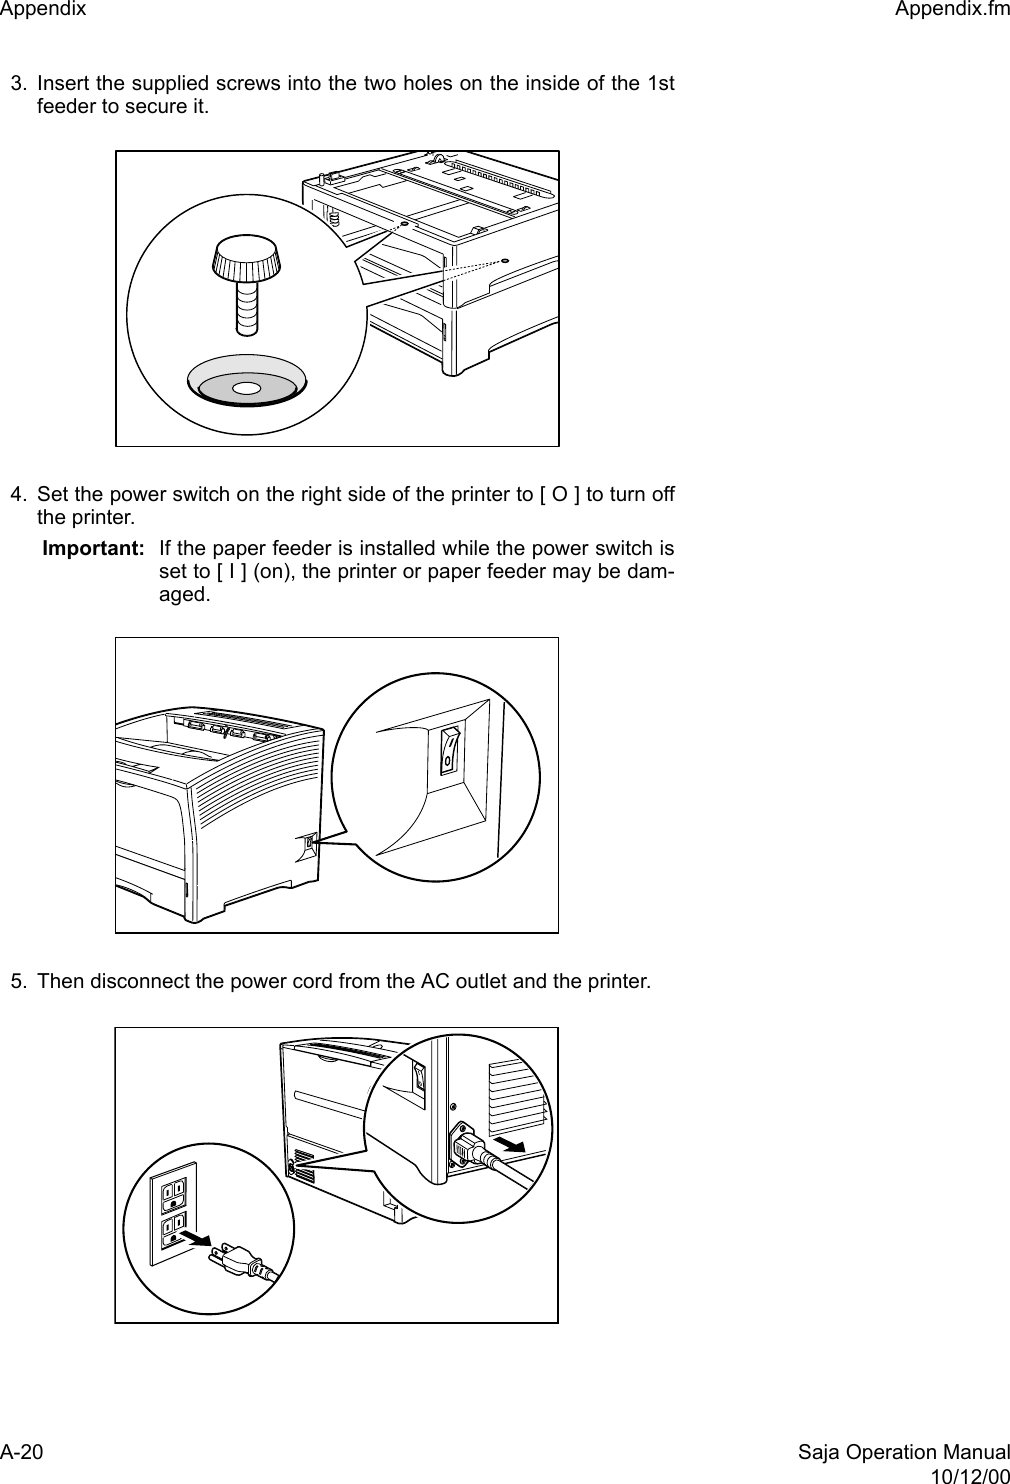 A-20 Saja Operation Manual10/12/00Appendix  Appendix.fm3. Insert the supplied screws into the two holes on the inside of the 1stfeeder to secure it.4. Set the power switch on the right side of the printer to [ O ] to turn offthe printer. Important: If the paper feeder is installed while the power switch isset to [ I ] (on), the printer or paper feeder may be dam-aged. 5. Then disconnect the power cord from the AC outlet and the printer. 